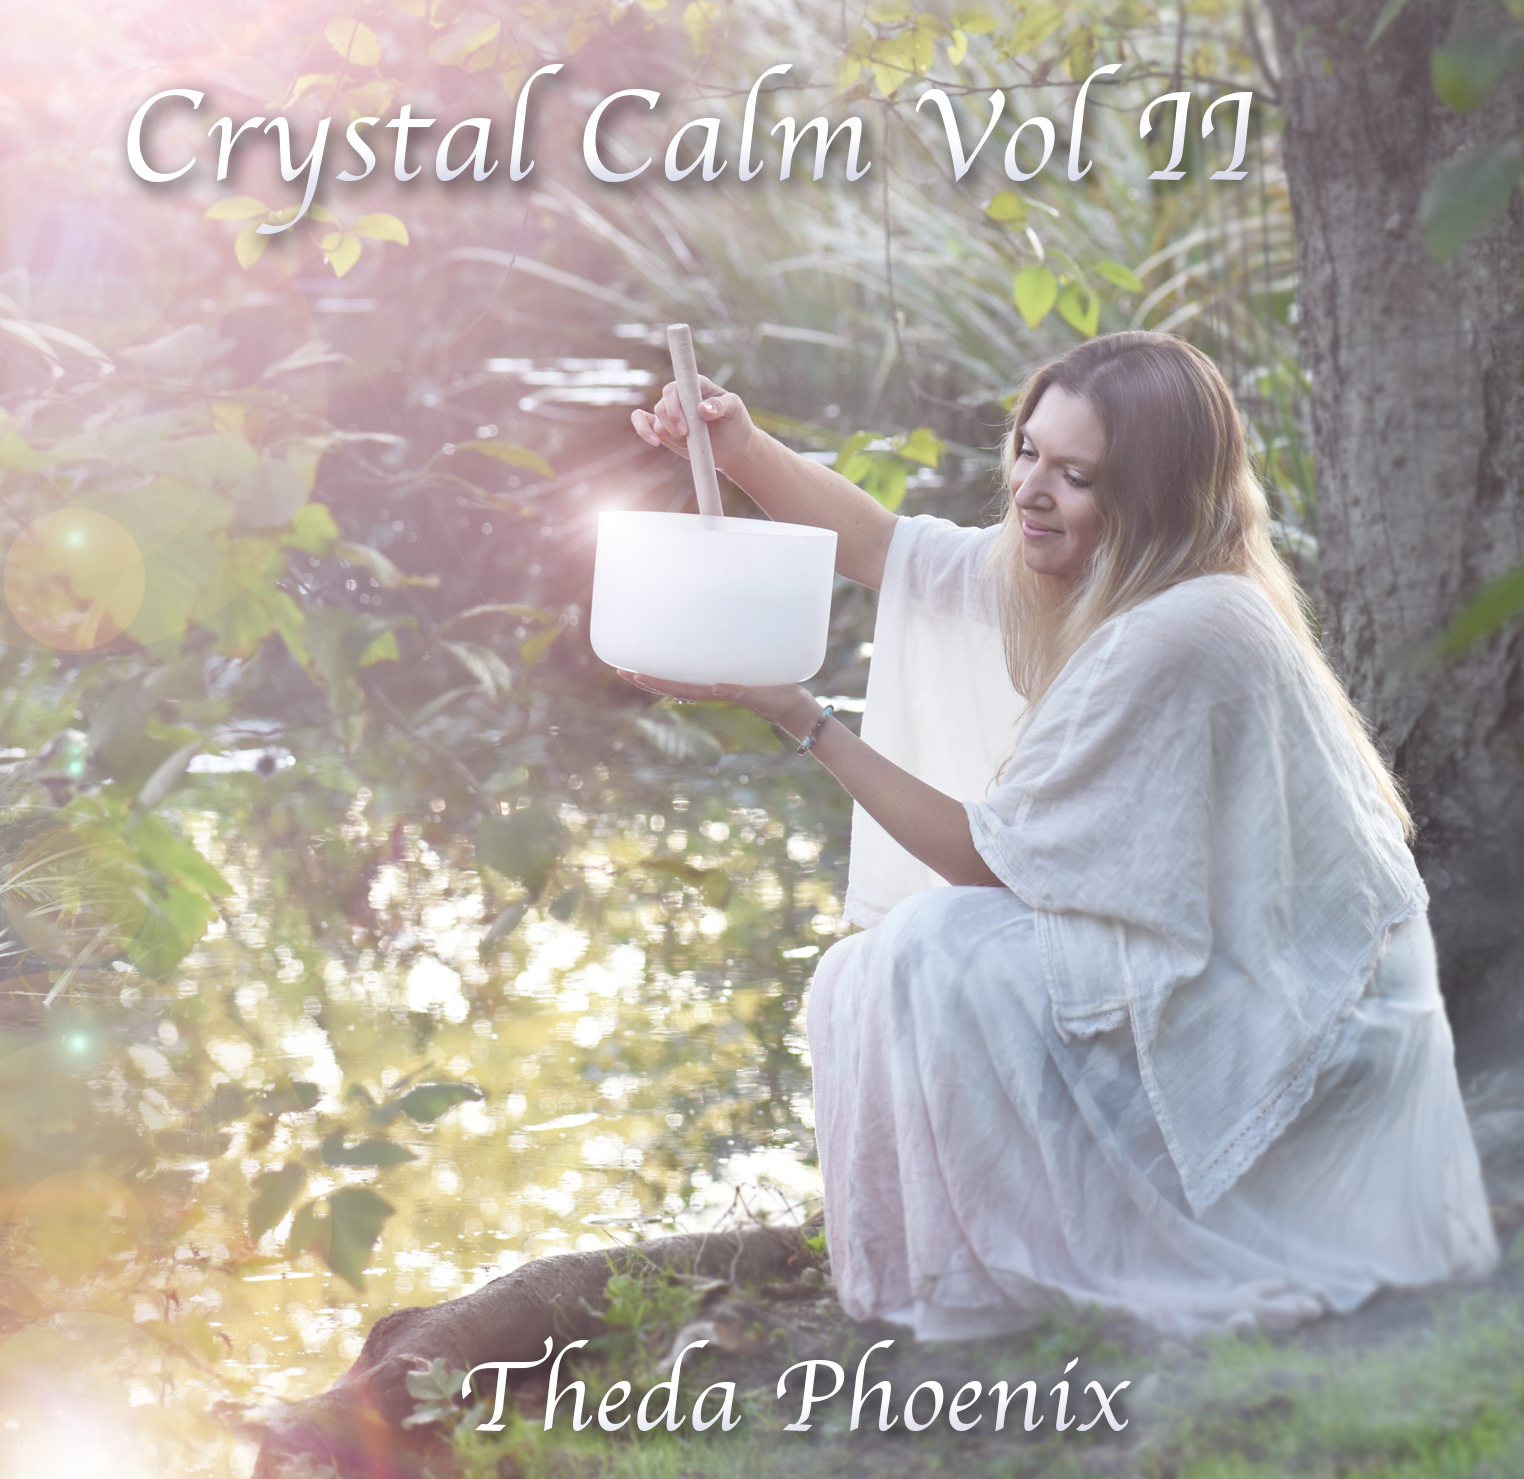 Theda Phoenix - 'Crystal Calm Vol. 2' Review | Opinions | LIVING LIFE FEARLESS